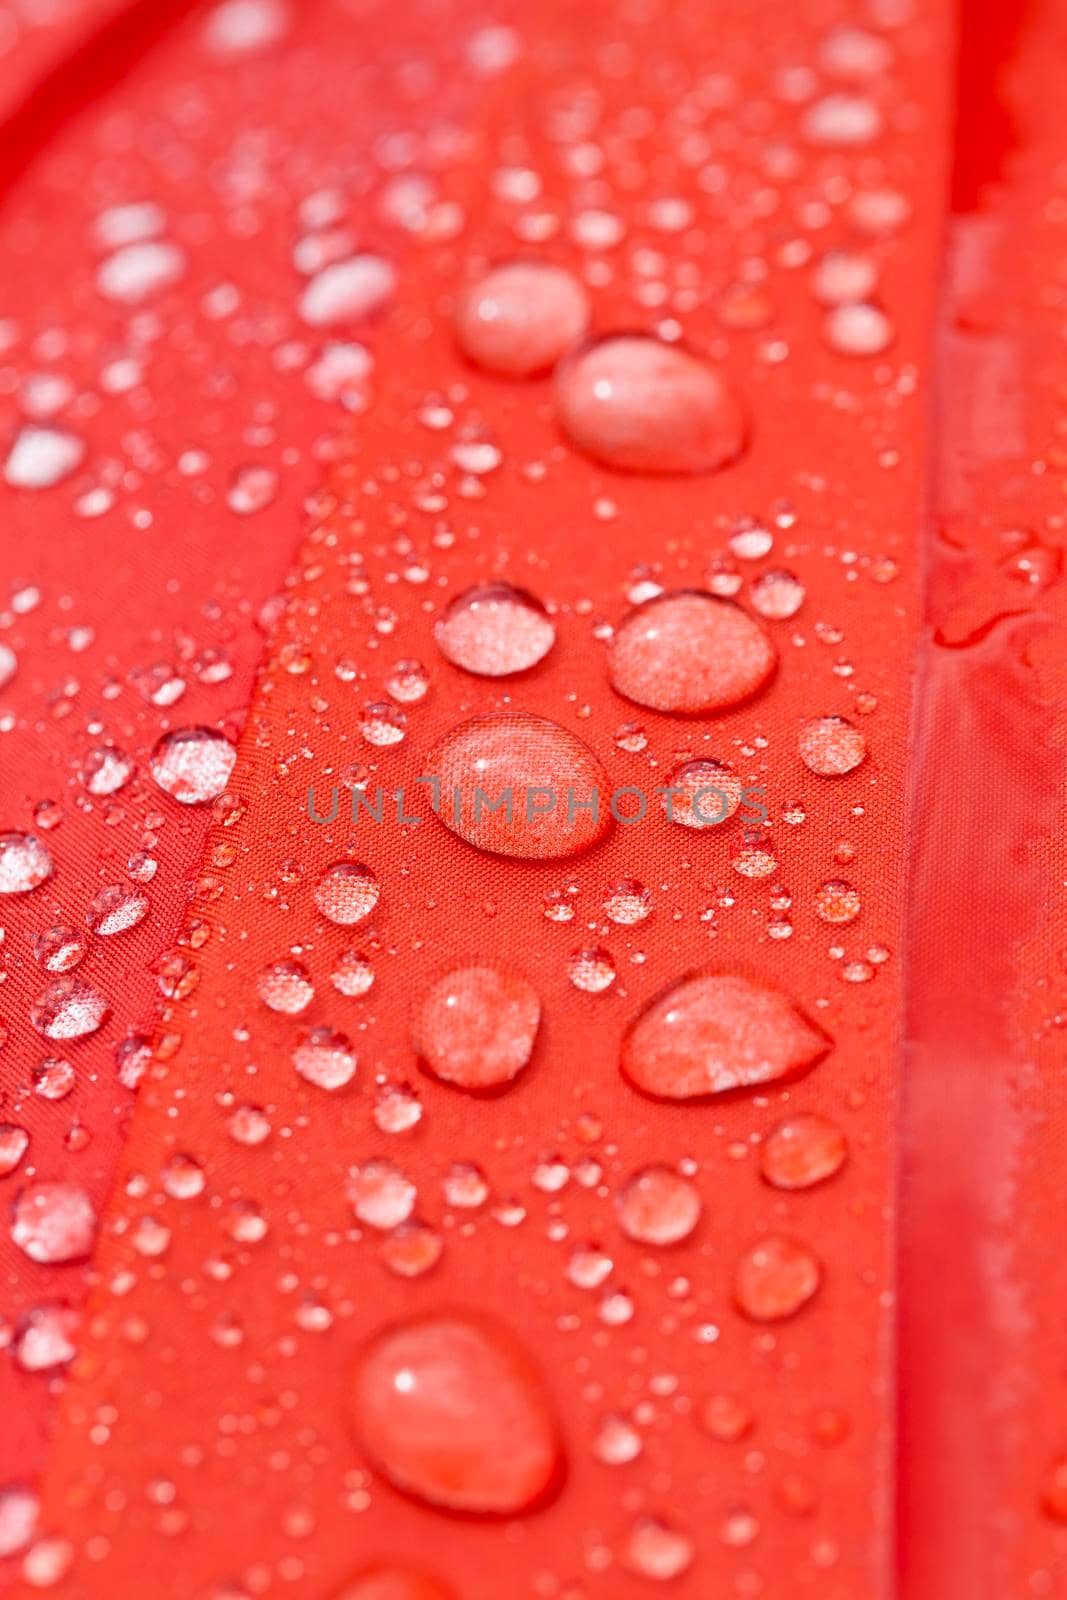 red part of a multi-colored umbrella with water drops in the rain, closeup